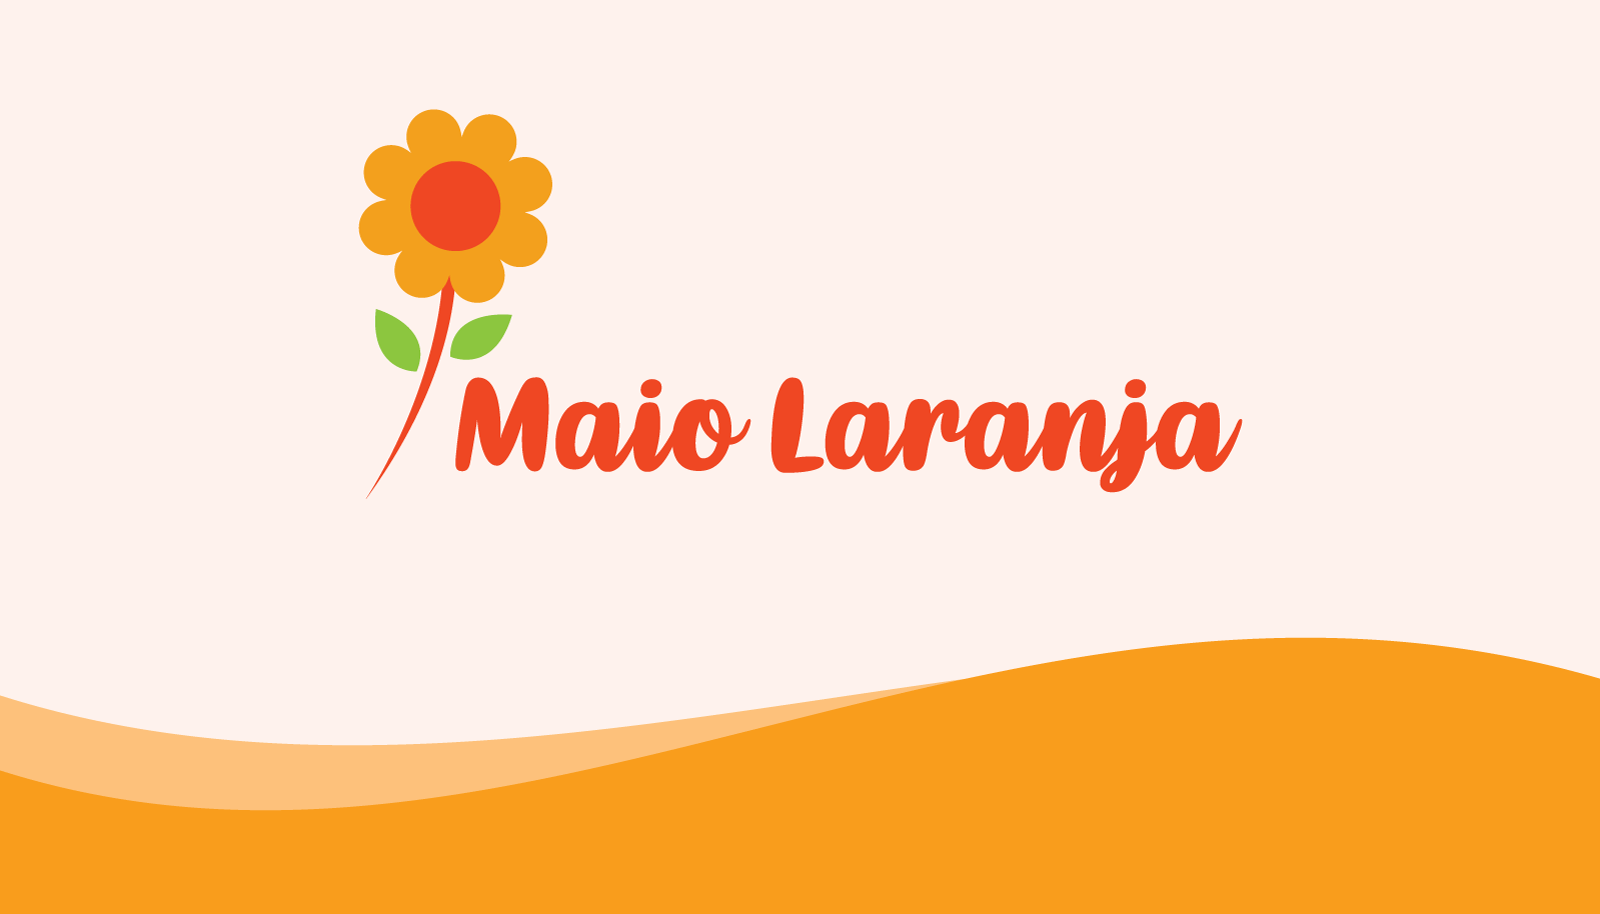 Maio laranja campaign against violence research of children 18 may flat design Logo Template